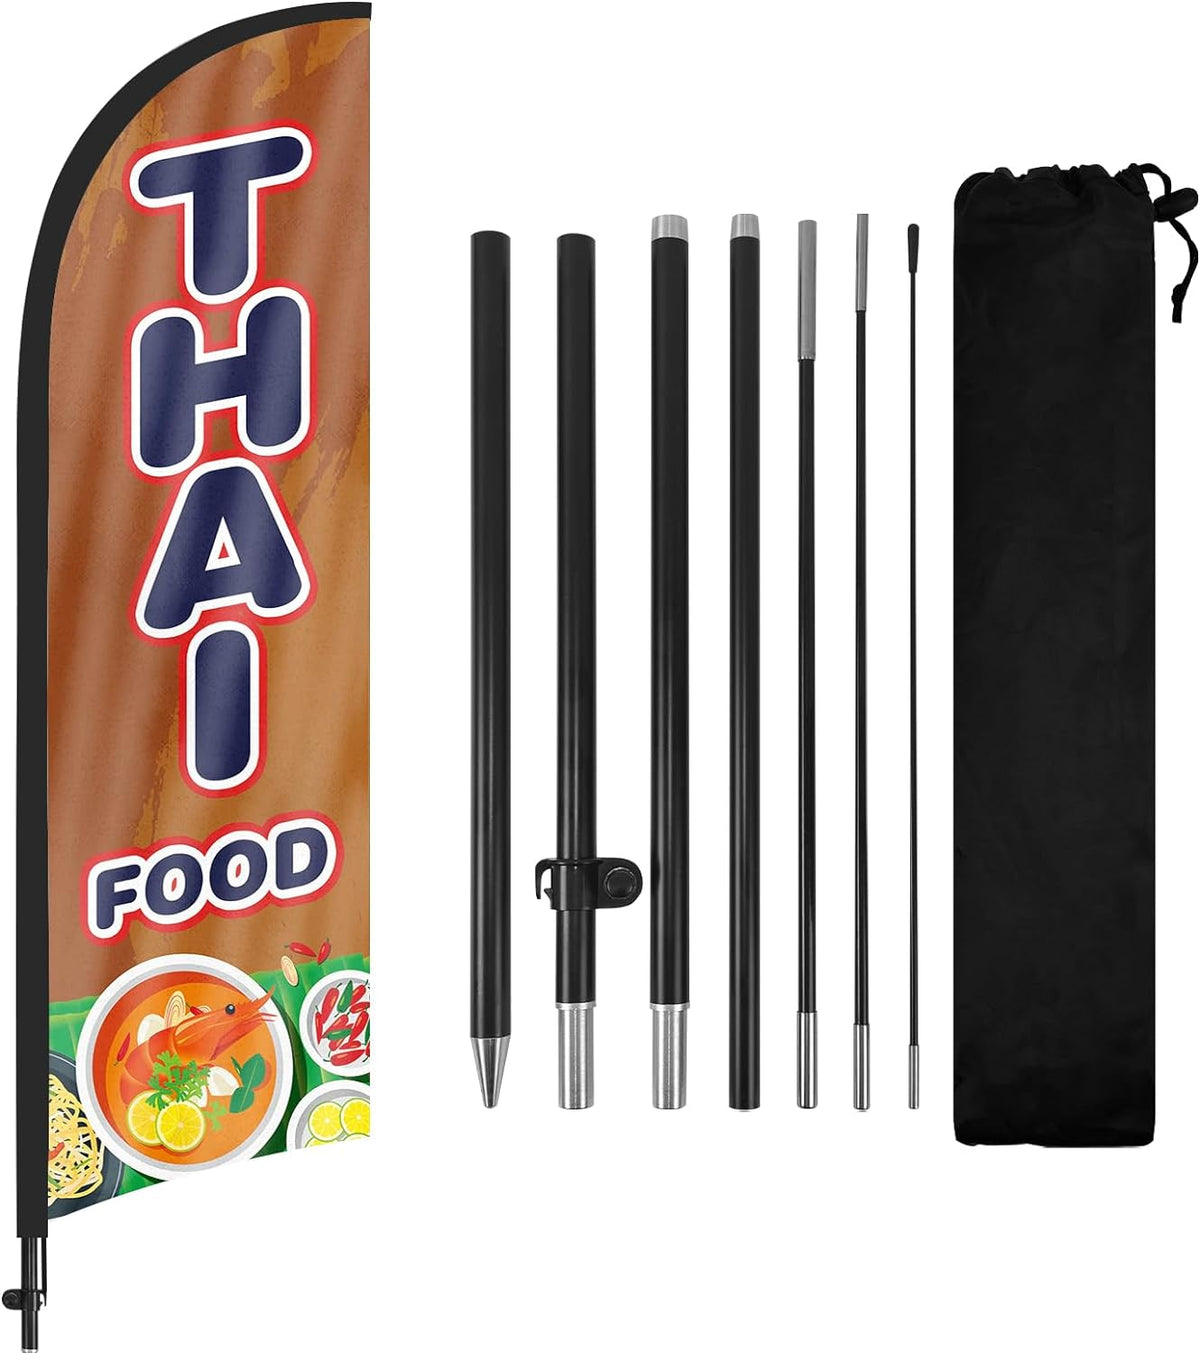 8ft Thai Food Feather Flag Kit - Advertising Banner with Pole and Stake